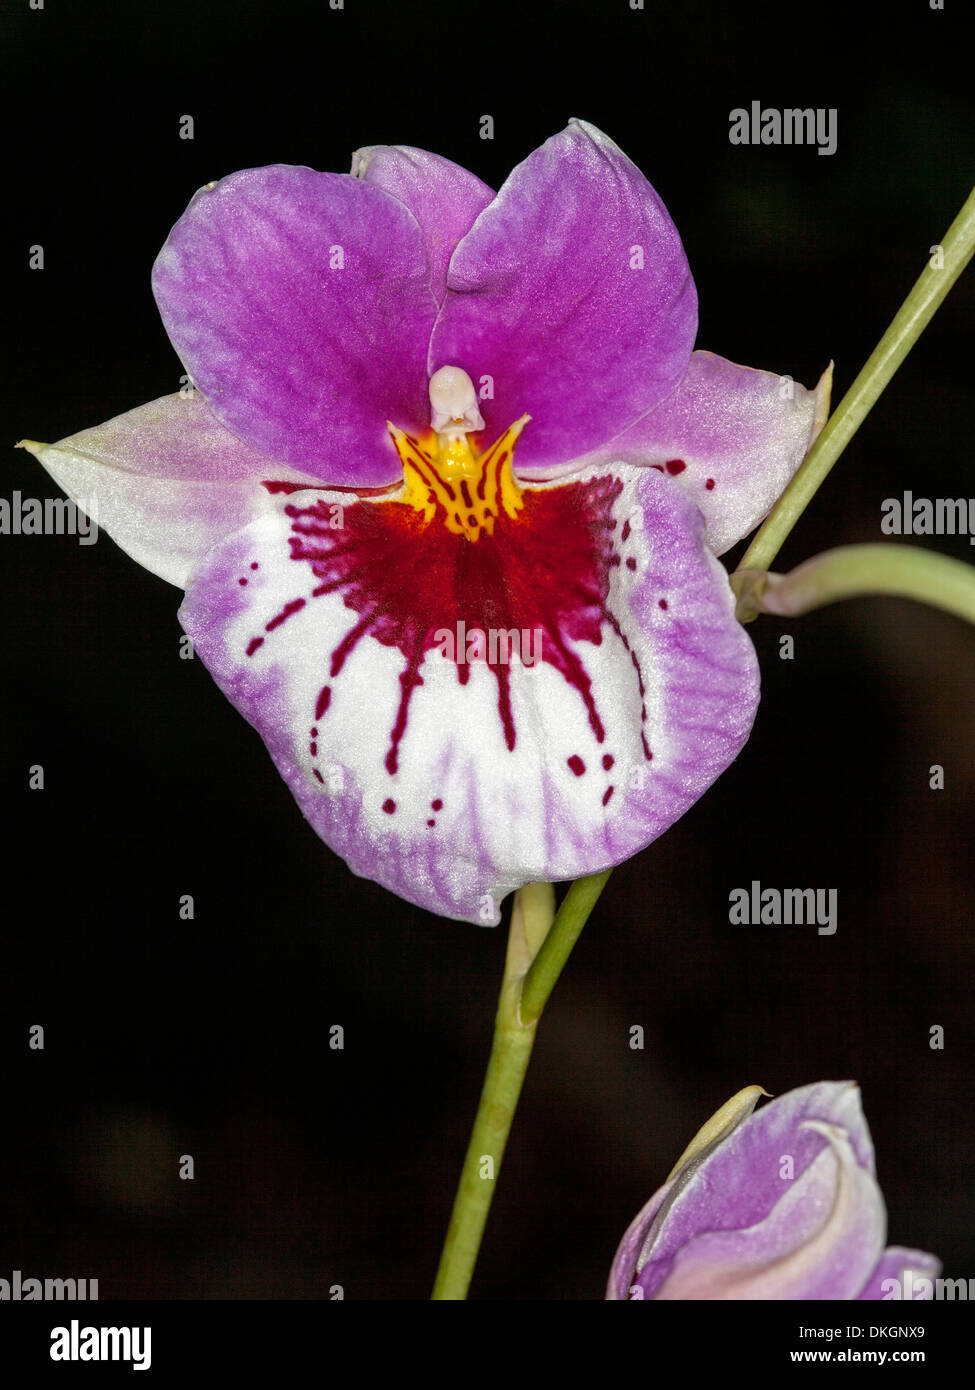 Spectacular purple and white flower of pansy orchid Miltoniopsis 'In The Pink' 'Voluptuous' against dark background Stock Photo